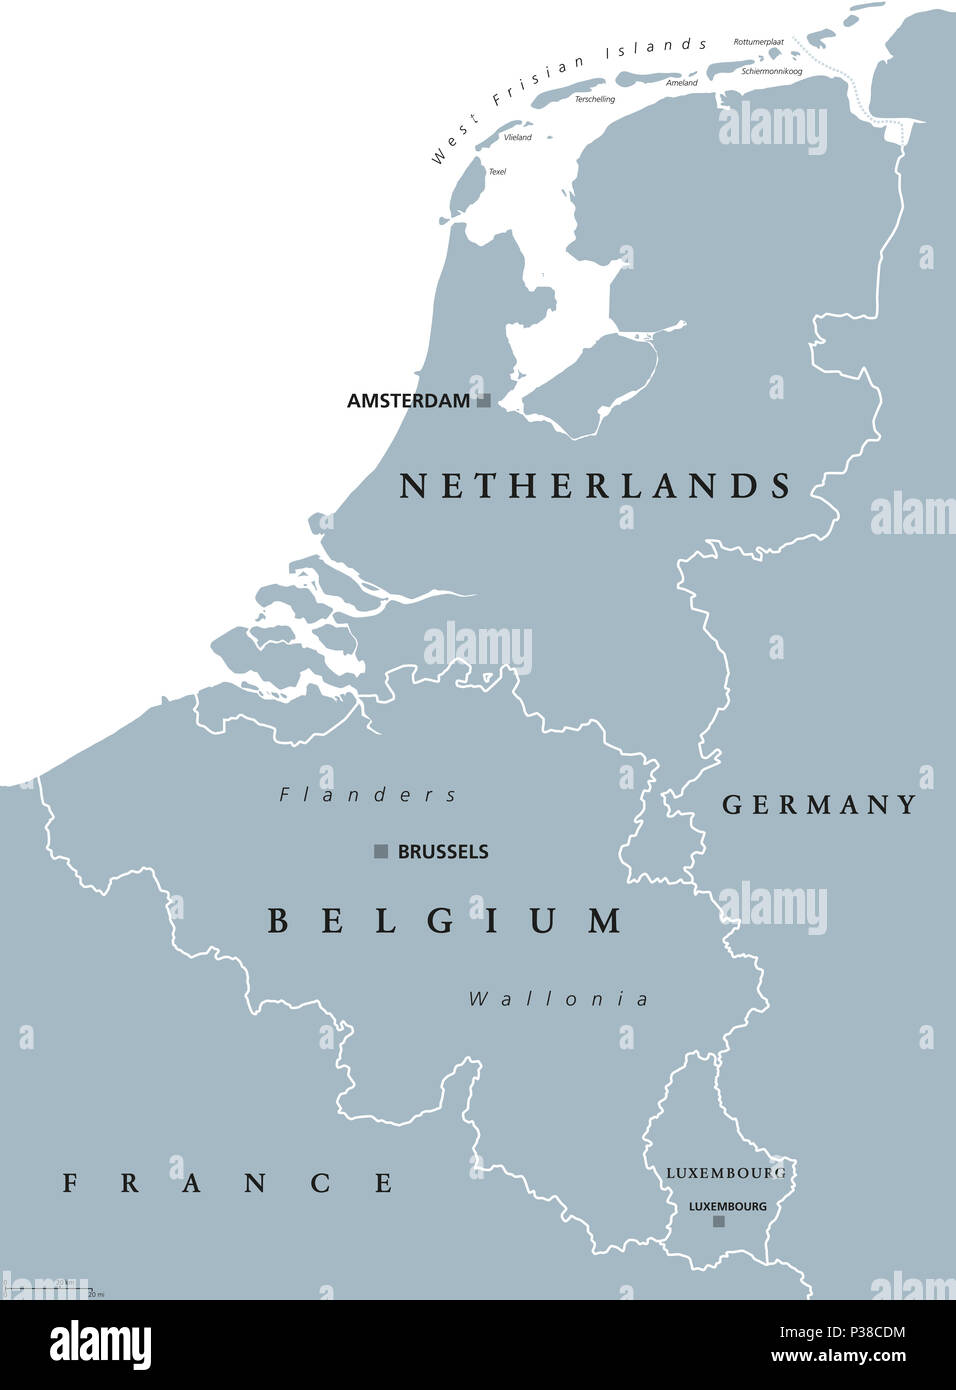 Benelux countries, gray colored political map. Belgium, Netherlands and Luxembourg. Benelux Union, a geographic, economic and cultural group. Stock Photo